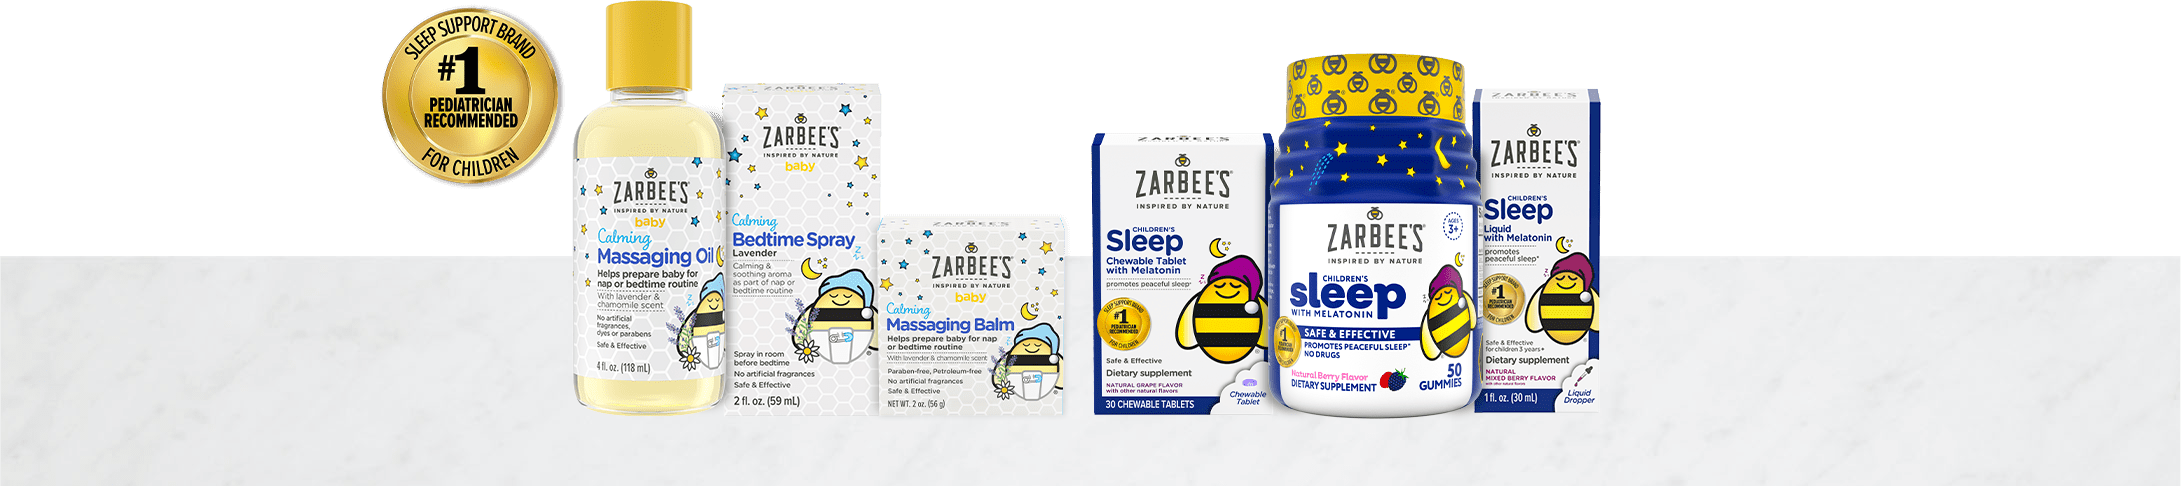 Zarbee’s sleep support product line packages